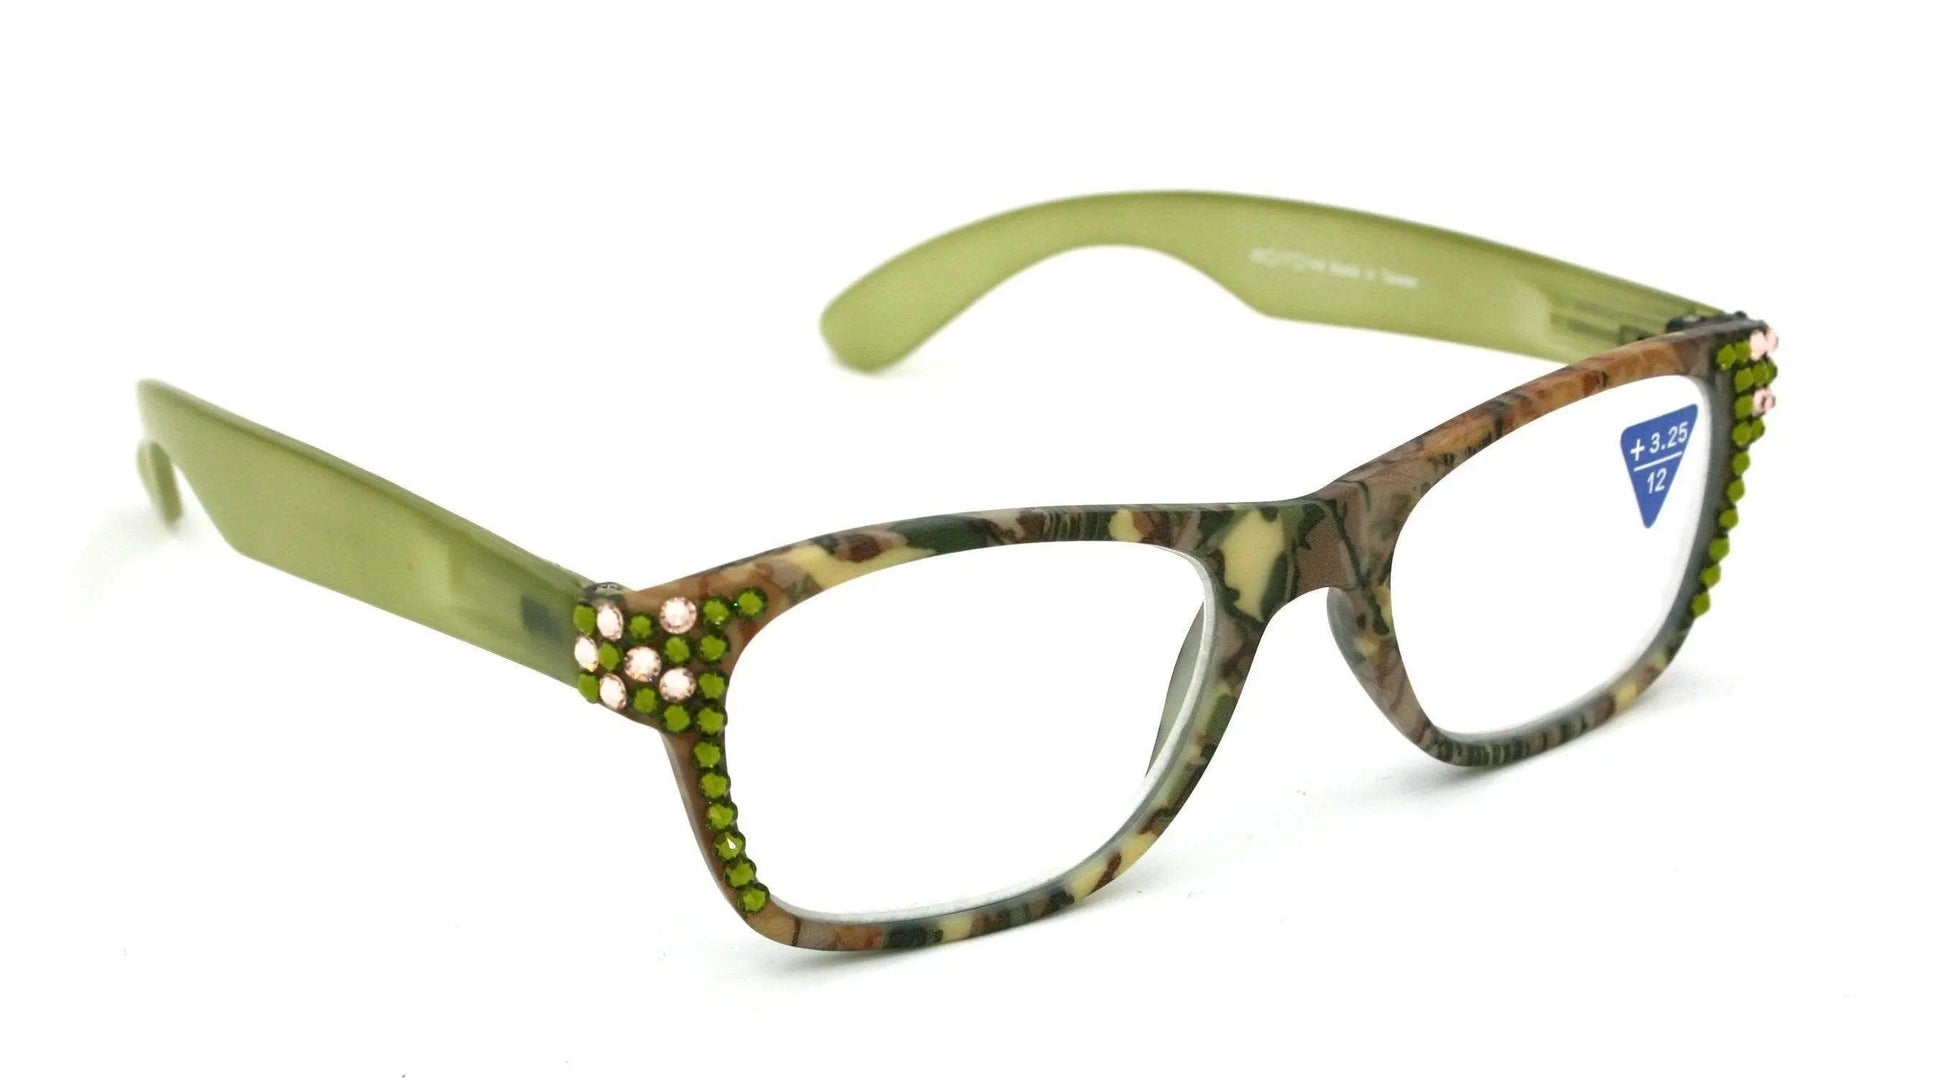 The Forester, (Bling) Reading Glasses For Women W (Olivine, Light Colorado) Genuine European Crystals. +1.25..+3 (Green Camouflage)